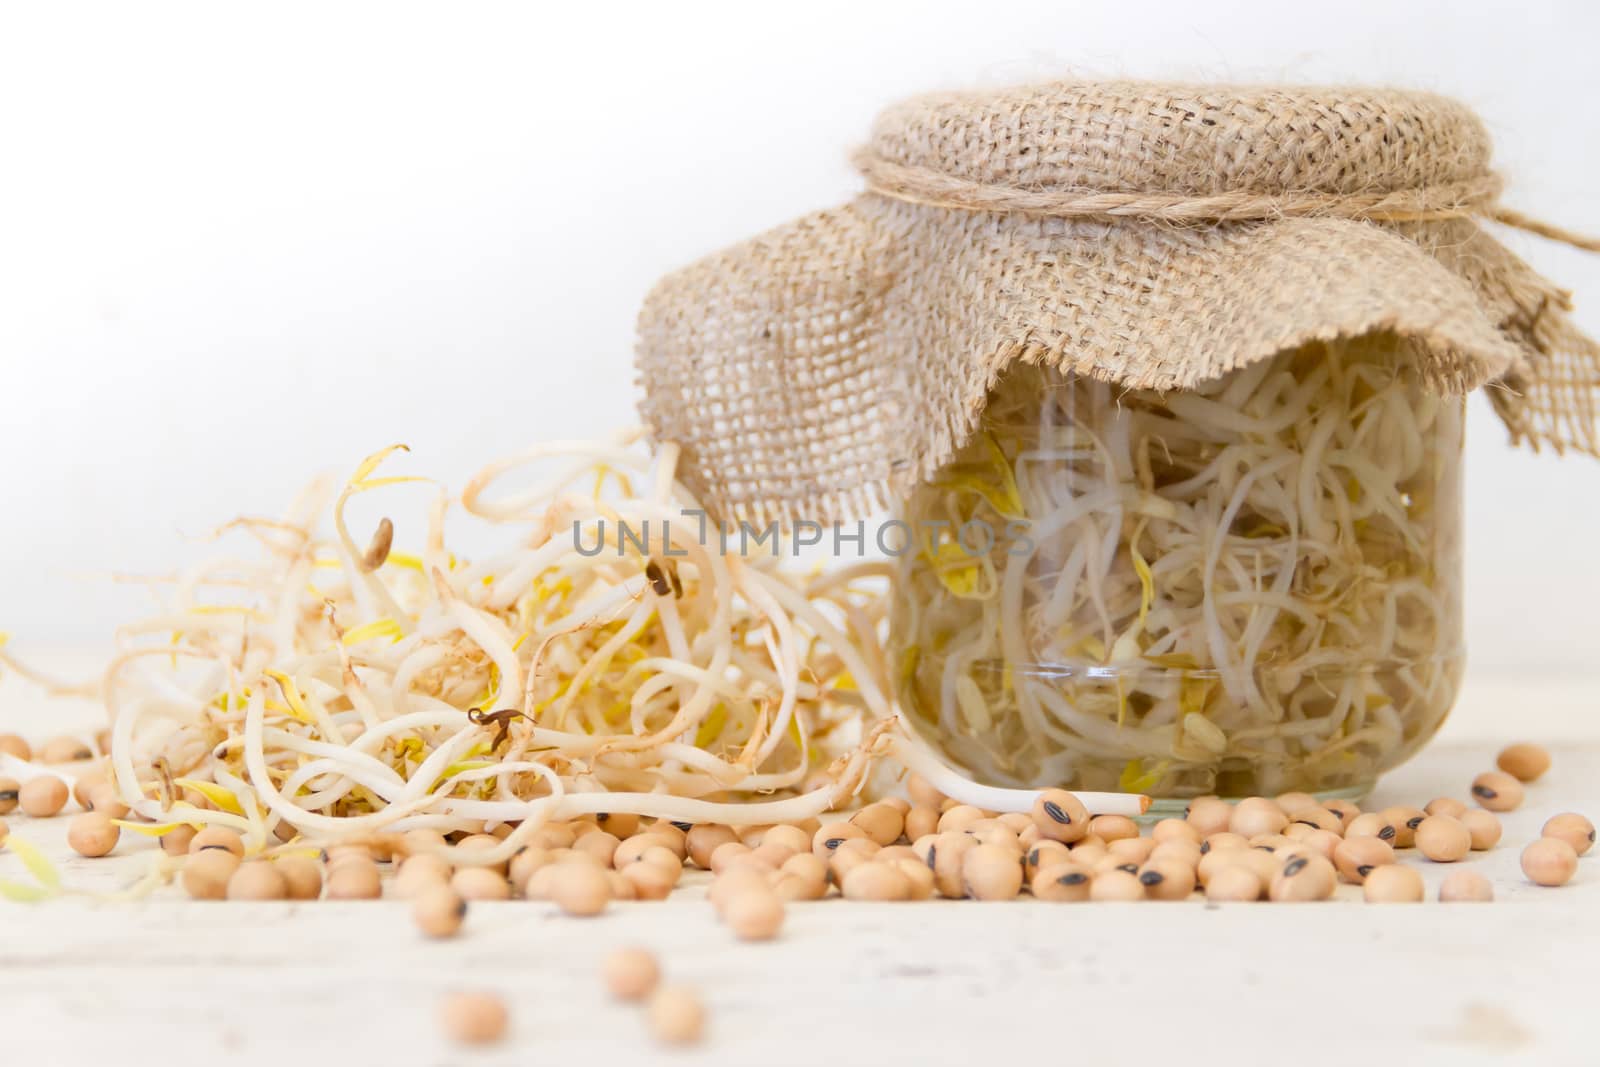 preparation of pickled soybeans in vinegar and with sauce by GabrielaBertolini